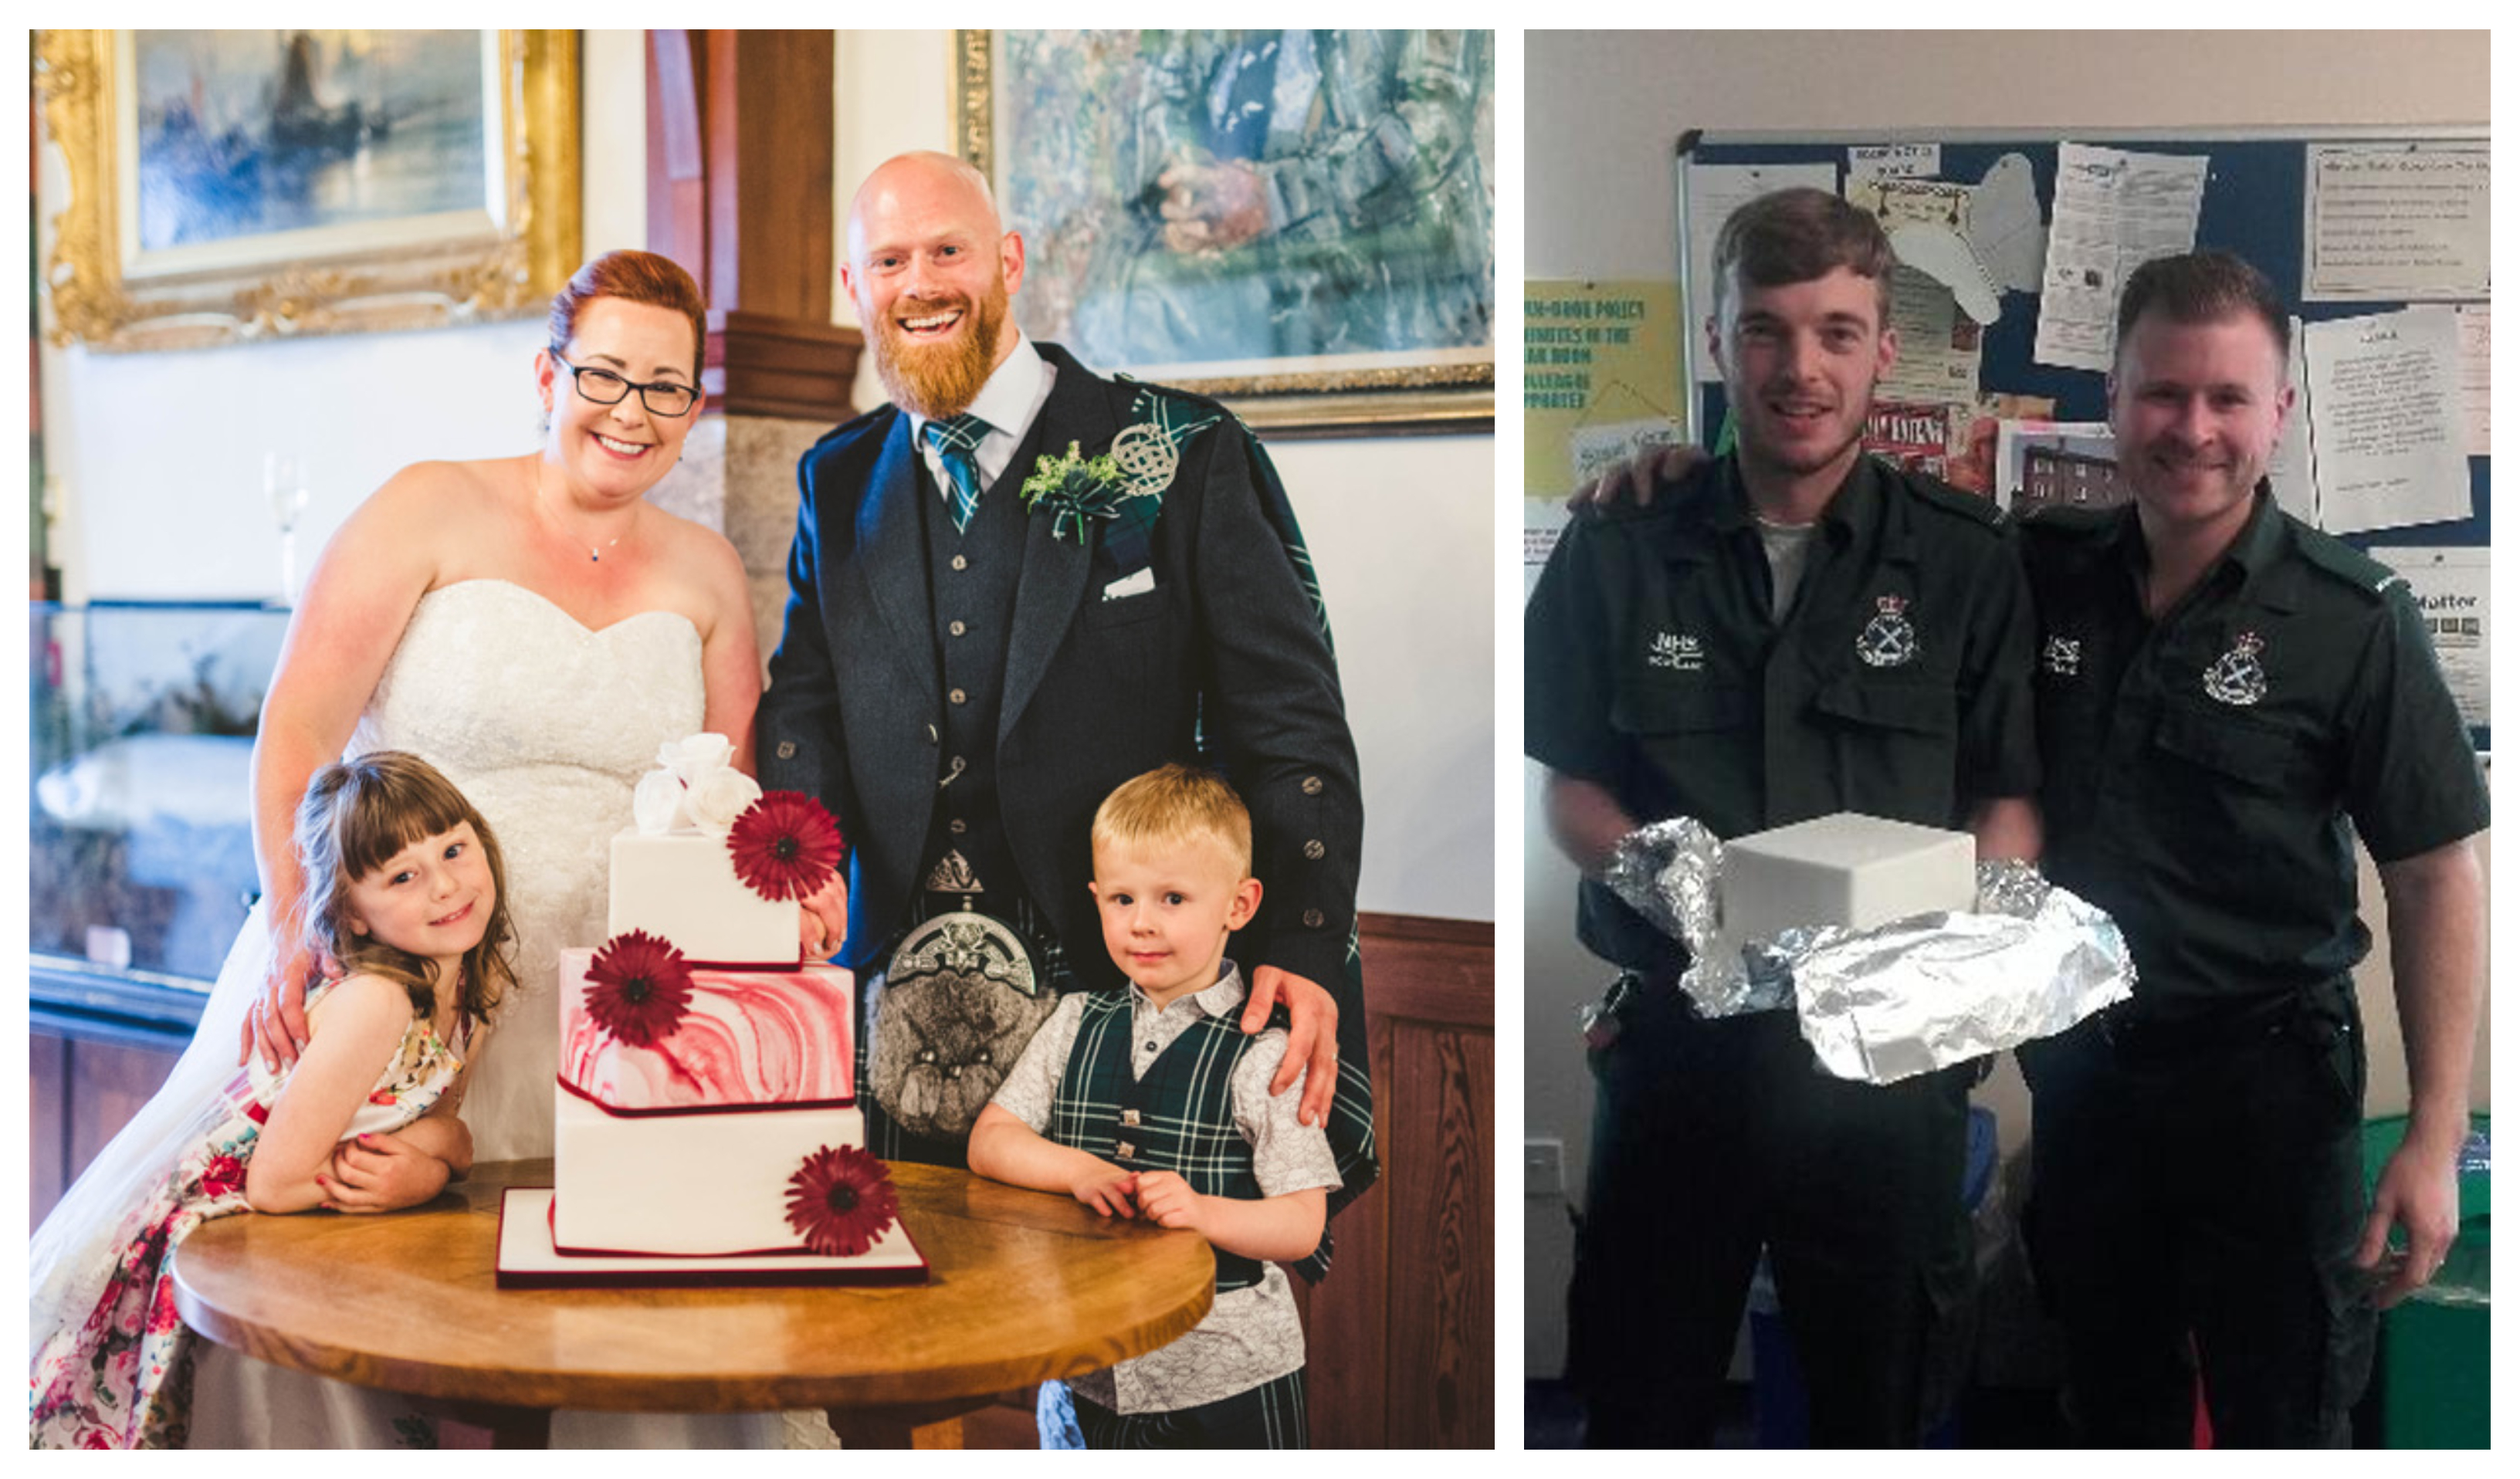 Caroline and Phil, with kids Olivia and Cameron at the wedding, and Scottish Ambulance staff, Connor Melville, holding the cake, with Richard Forte